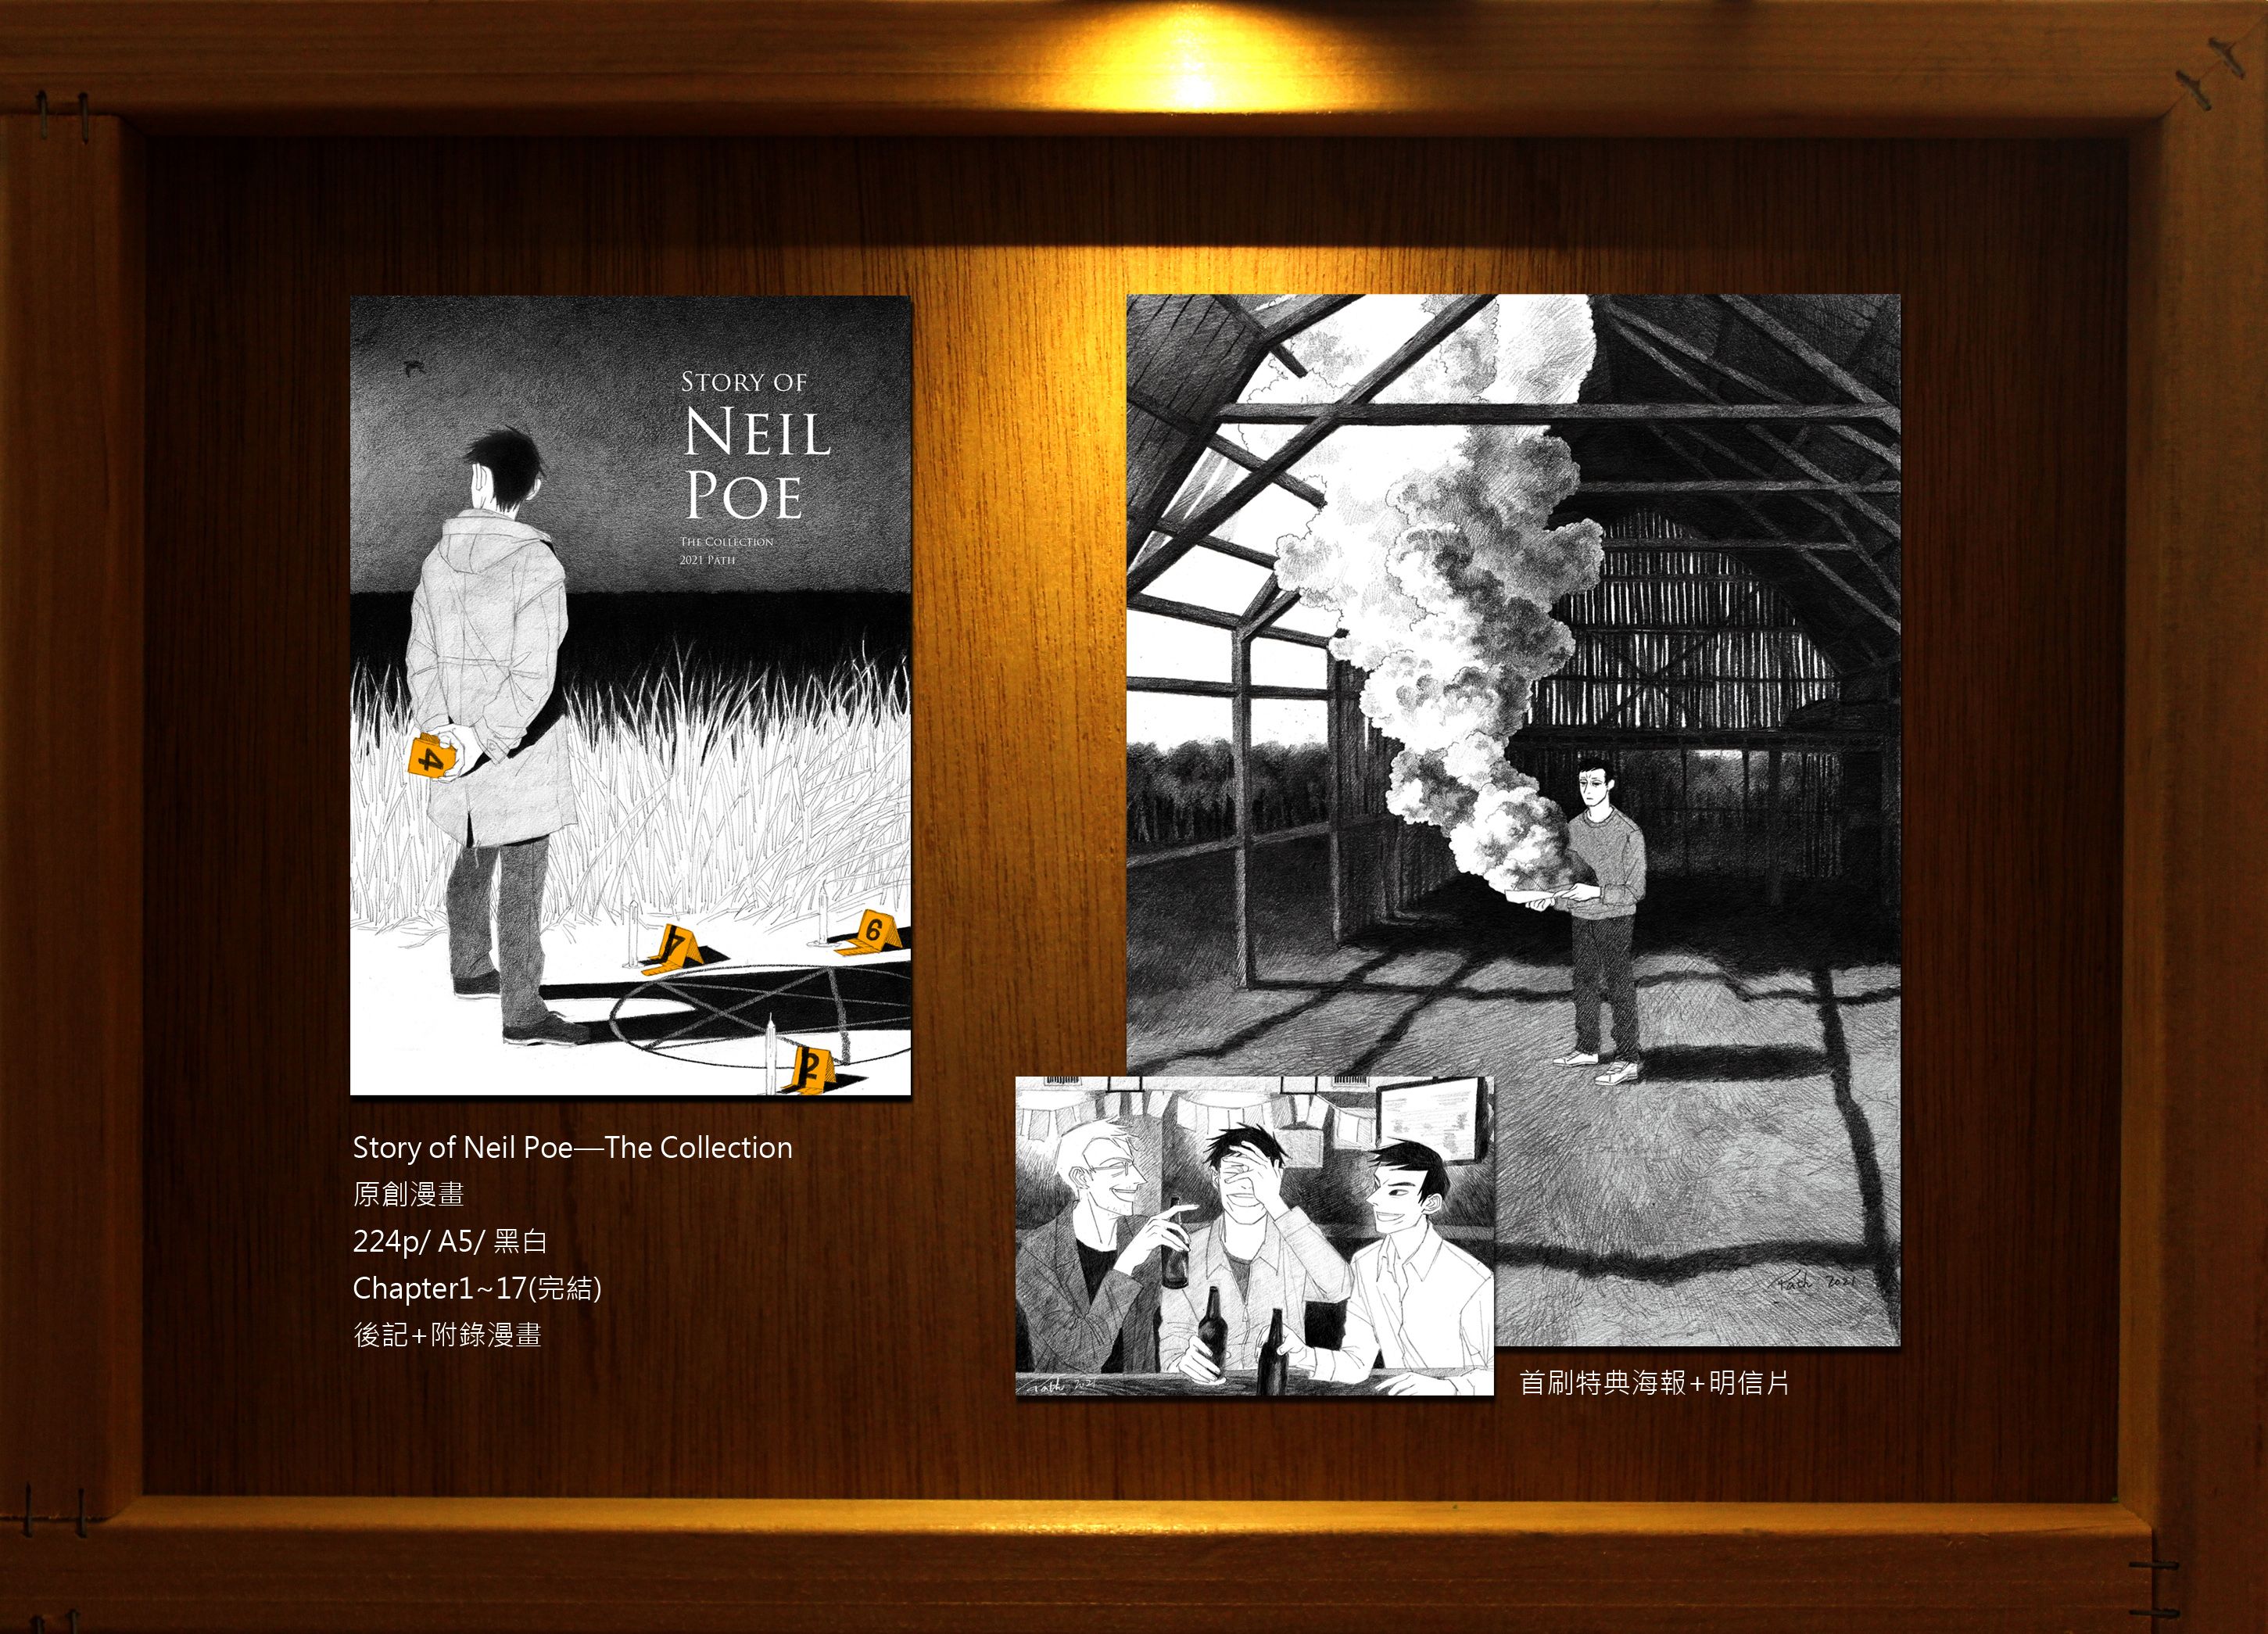 Story of Neil Poe— The Collection 試閱圖